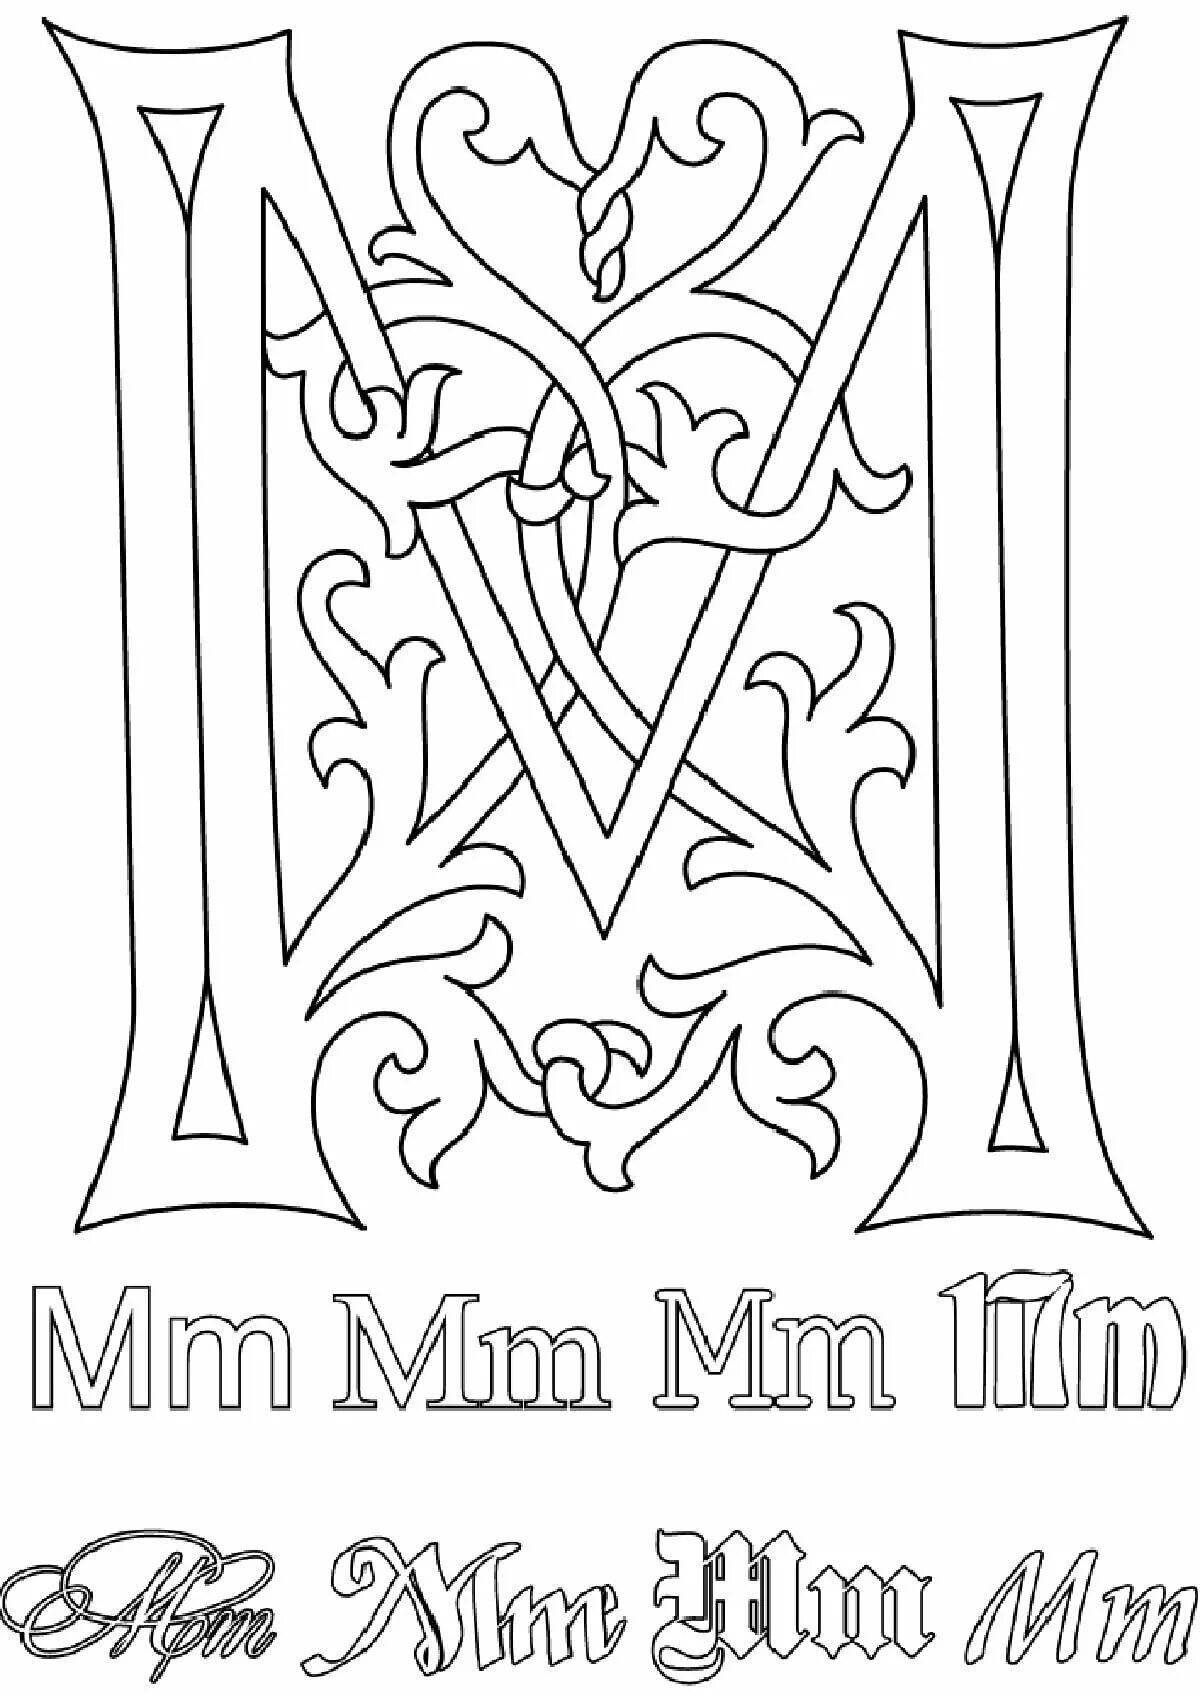 Cute letter a slavic coloring page